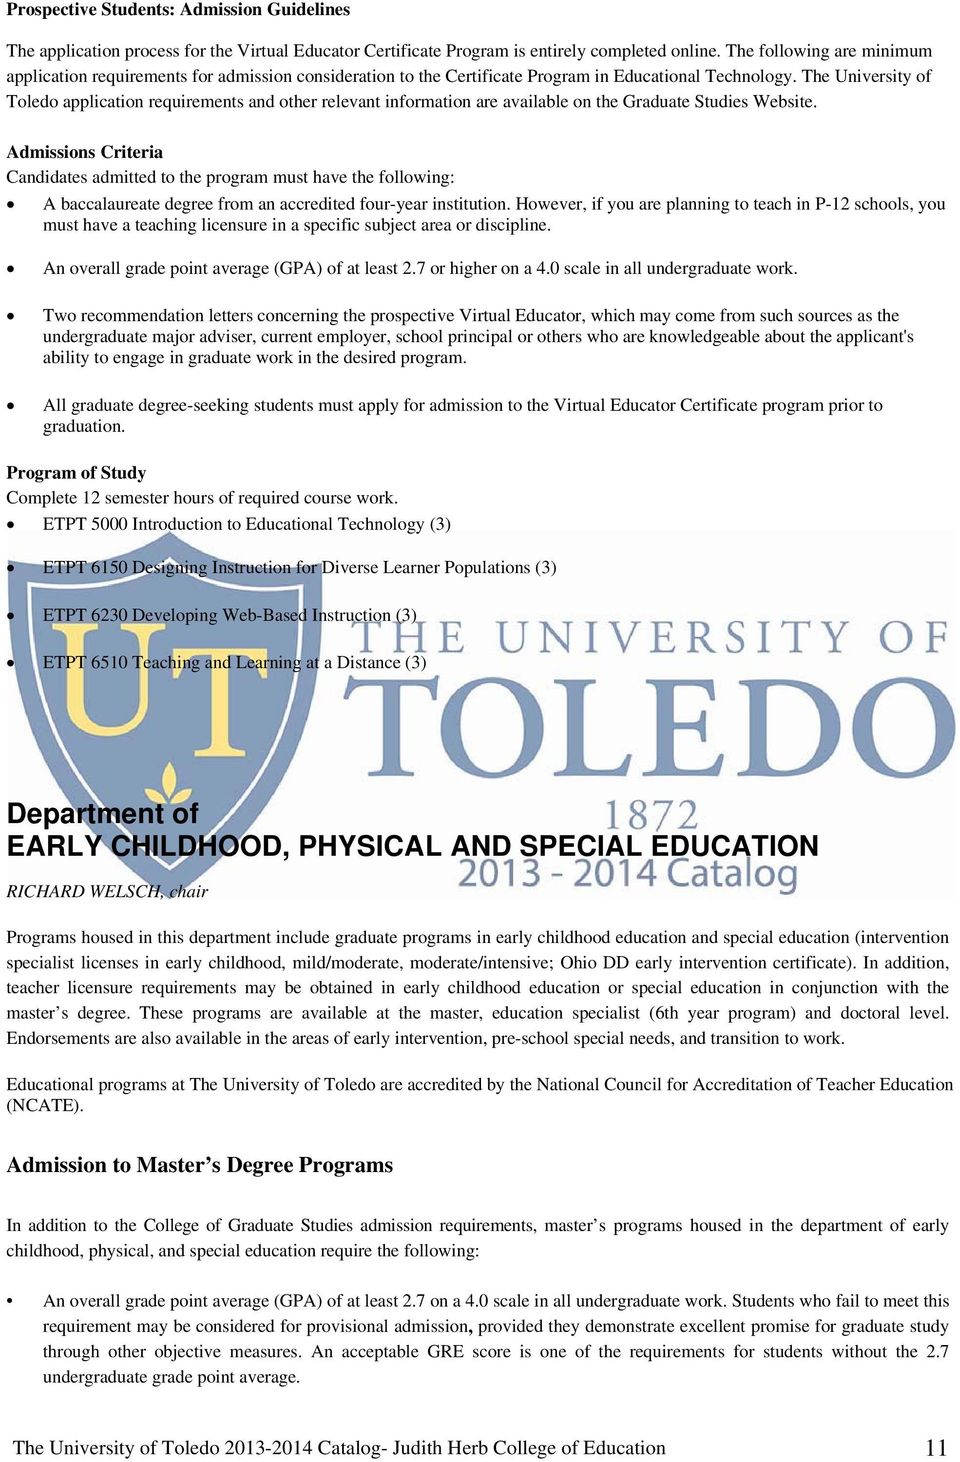 The University of Toledo application requirements and other relevant information are available on the Graduate Studies Website.